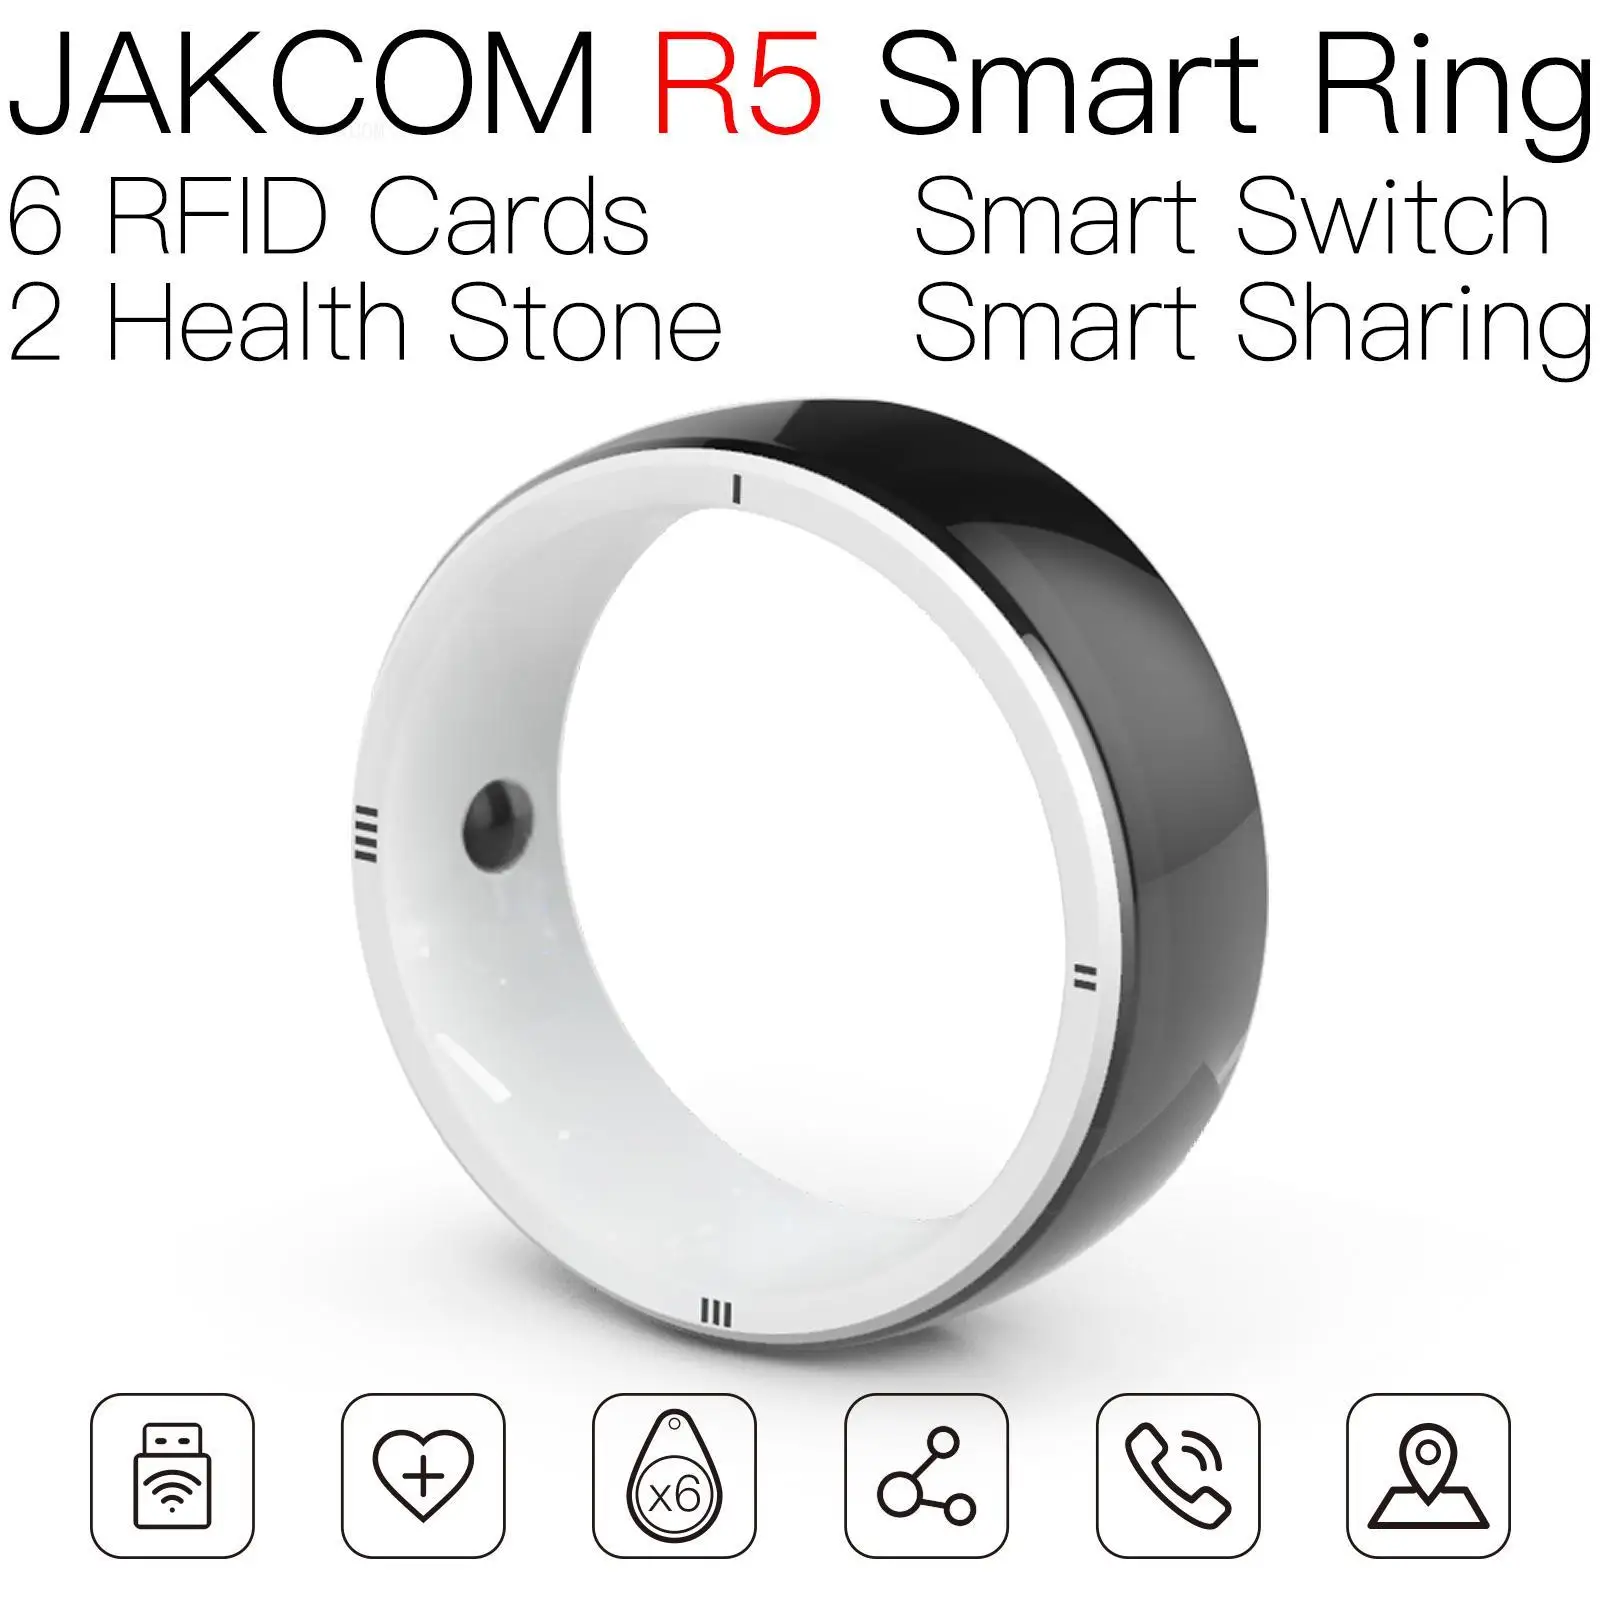 

JAKCOM R5 Smart Ring Match to album carte mini ebbok reader antenna loop hf cable tags labels tag rfid 900mhz nfc copy card